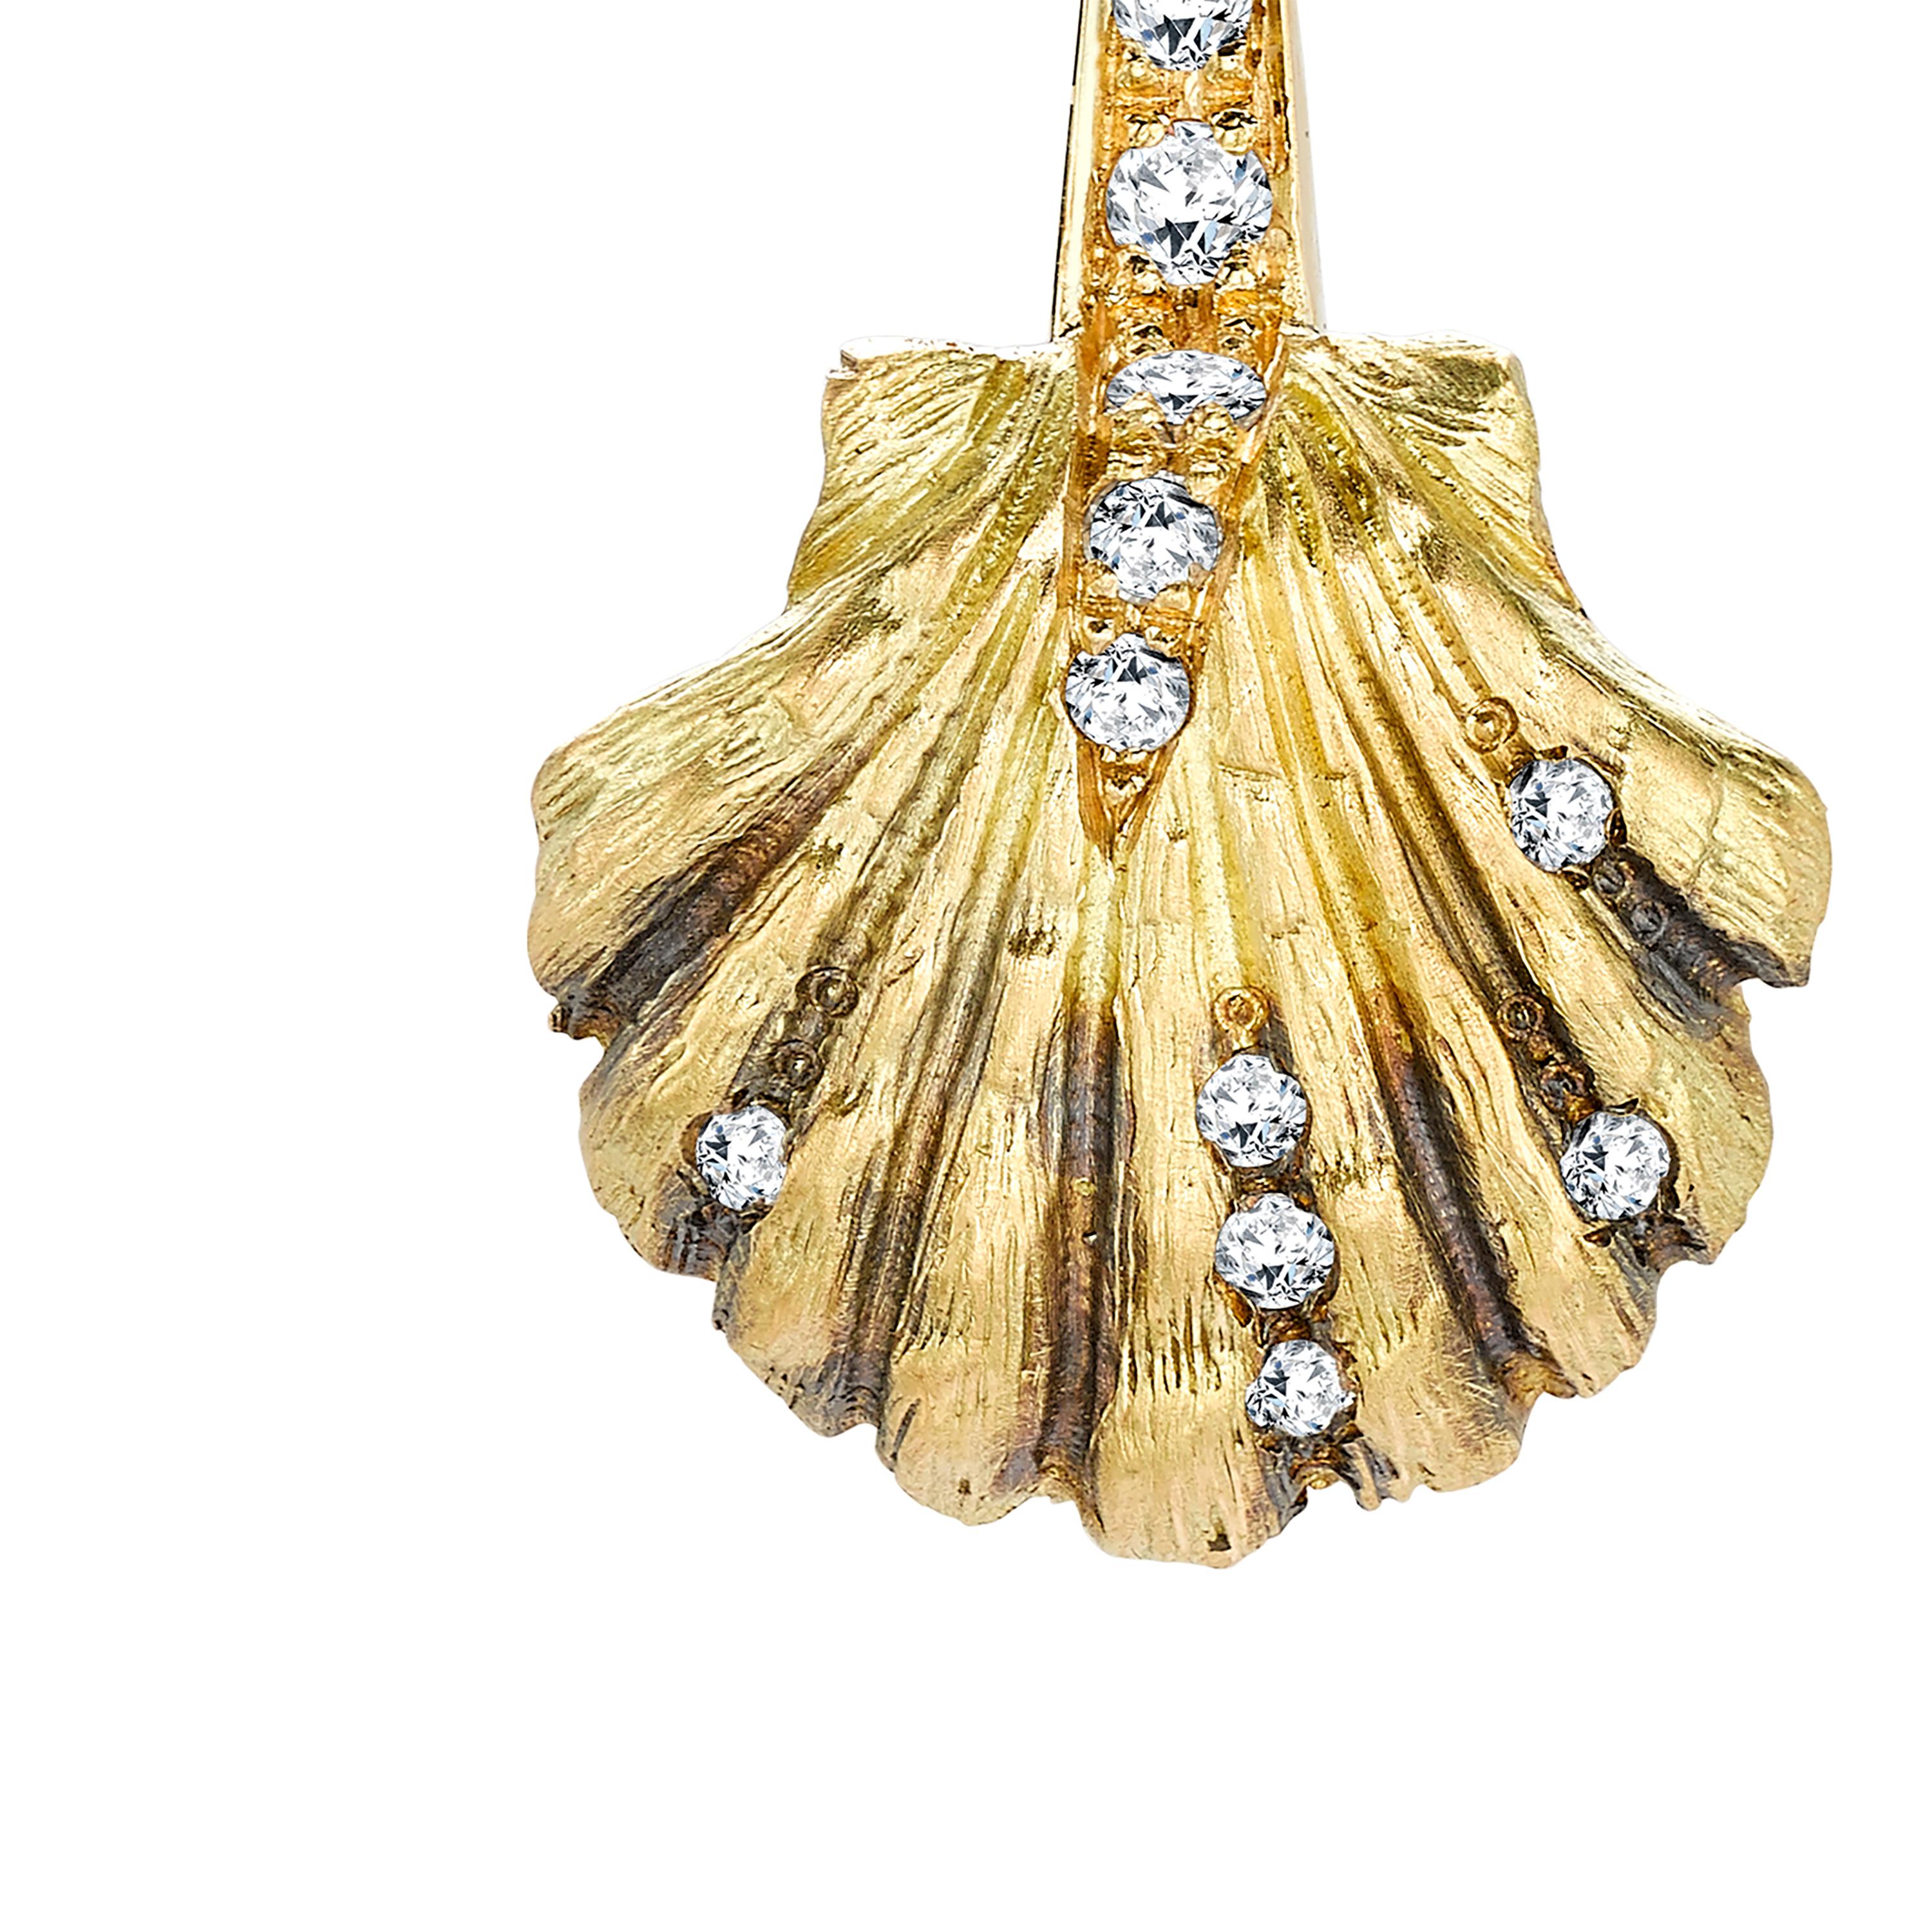 18k Yellow Gold approx. 7.60gr, Black Rhodium and 24 Diamonds 0.19ct

The simple scallop shell design of the Lady V has been seen in art and jewellery through the ages. A favoured shape, that of the Birth of Venus of Botticelli, has been textured